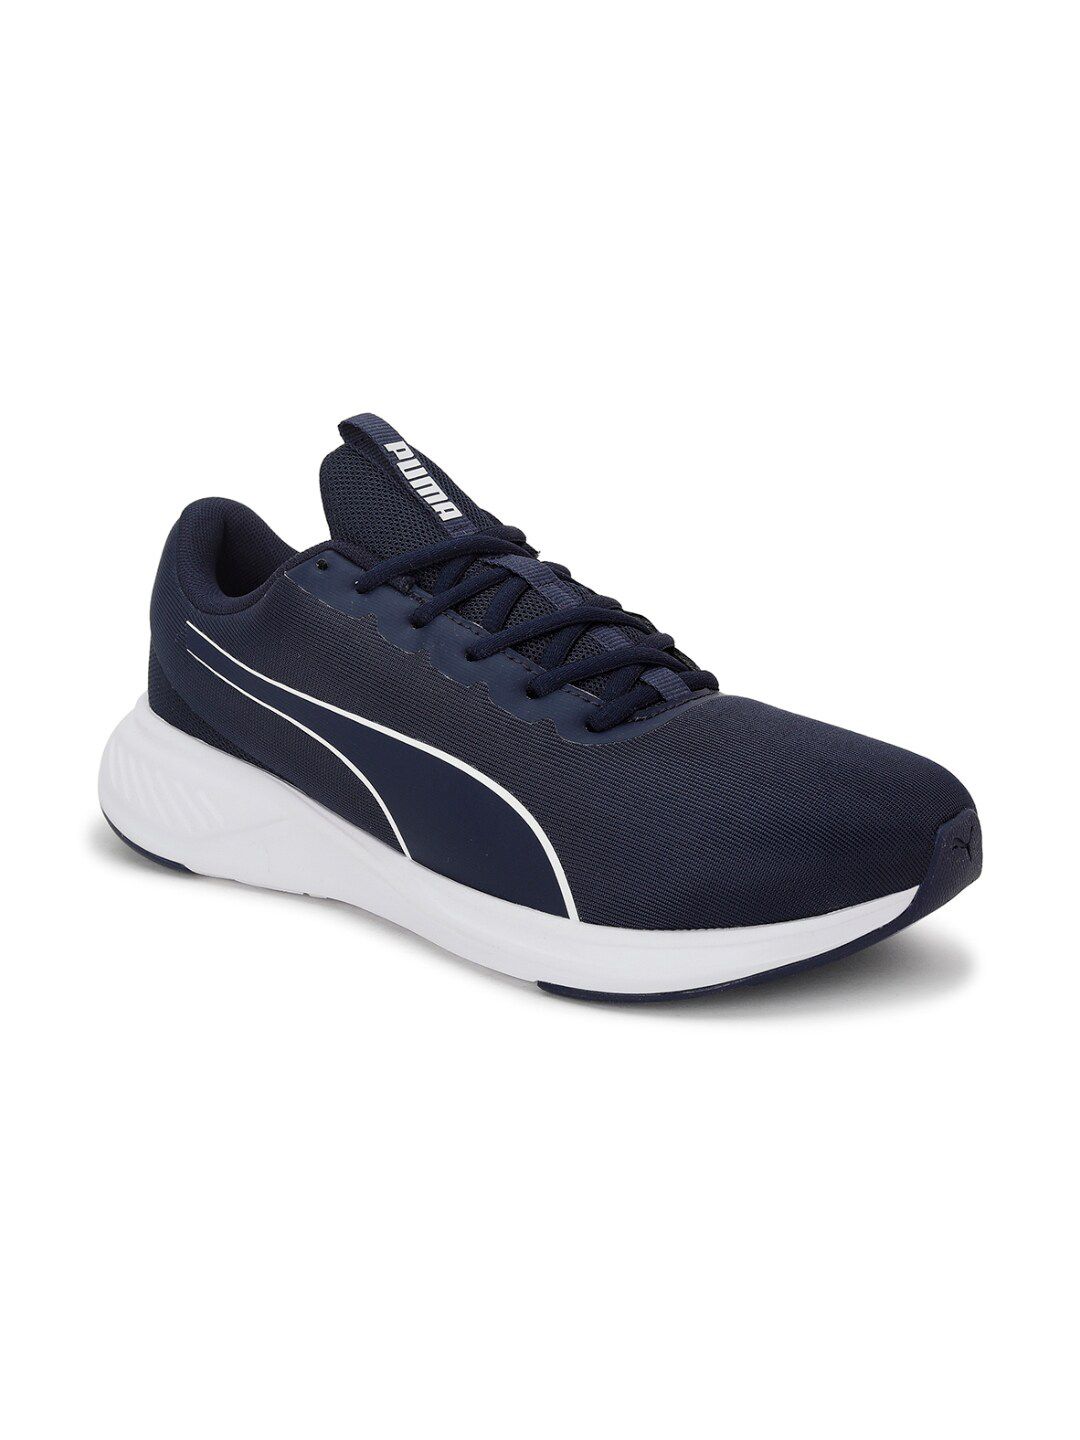 Puma Unisex Navy Blue & White Sports Shoes Price in India